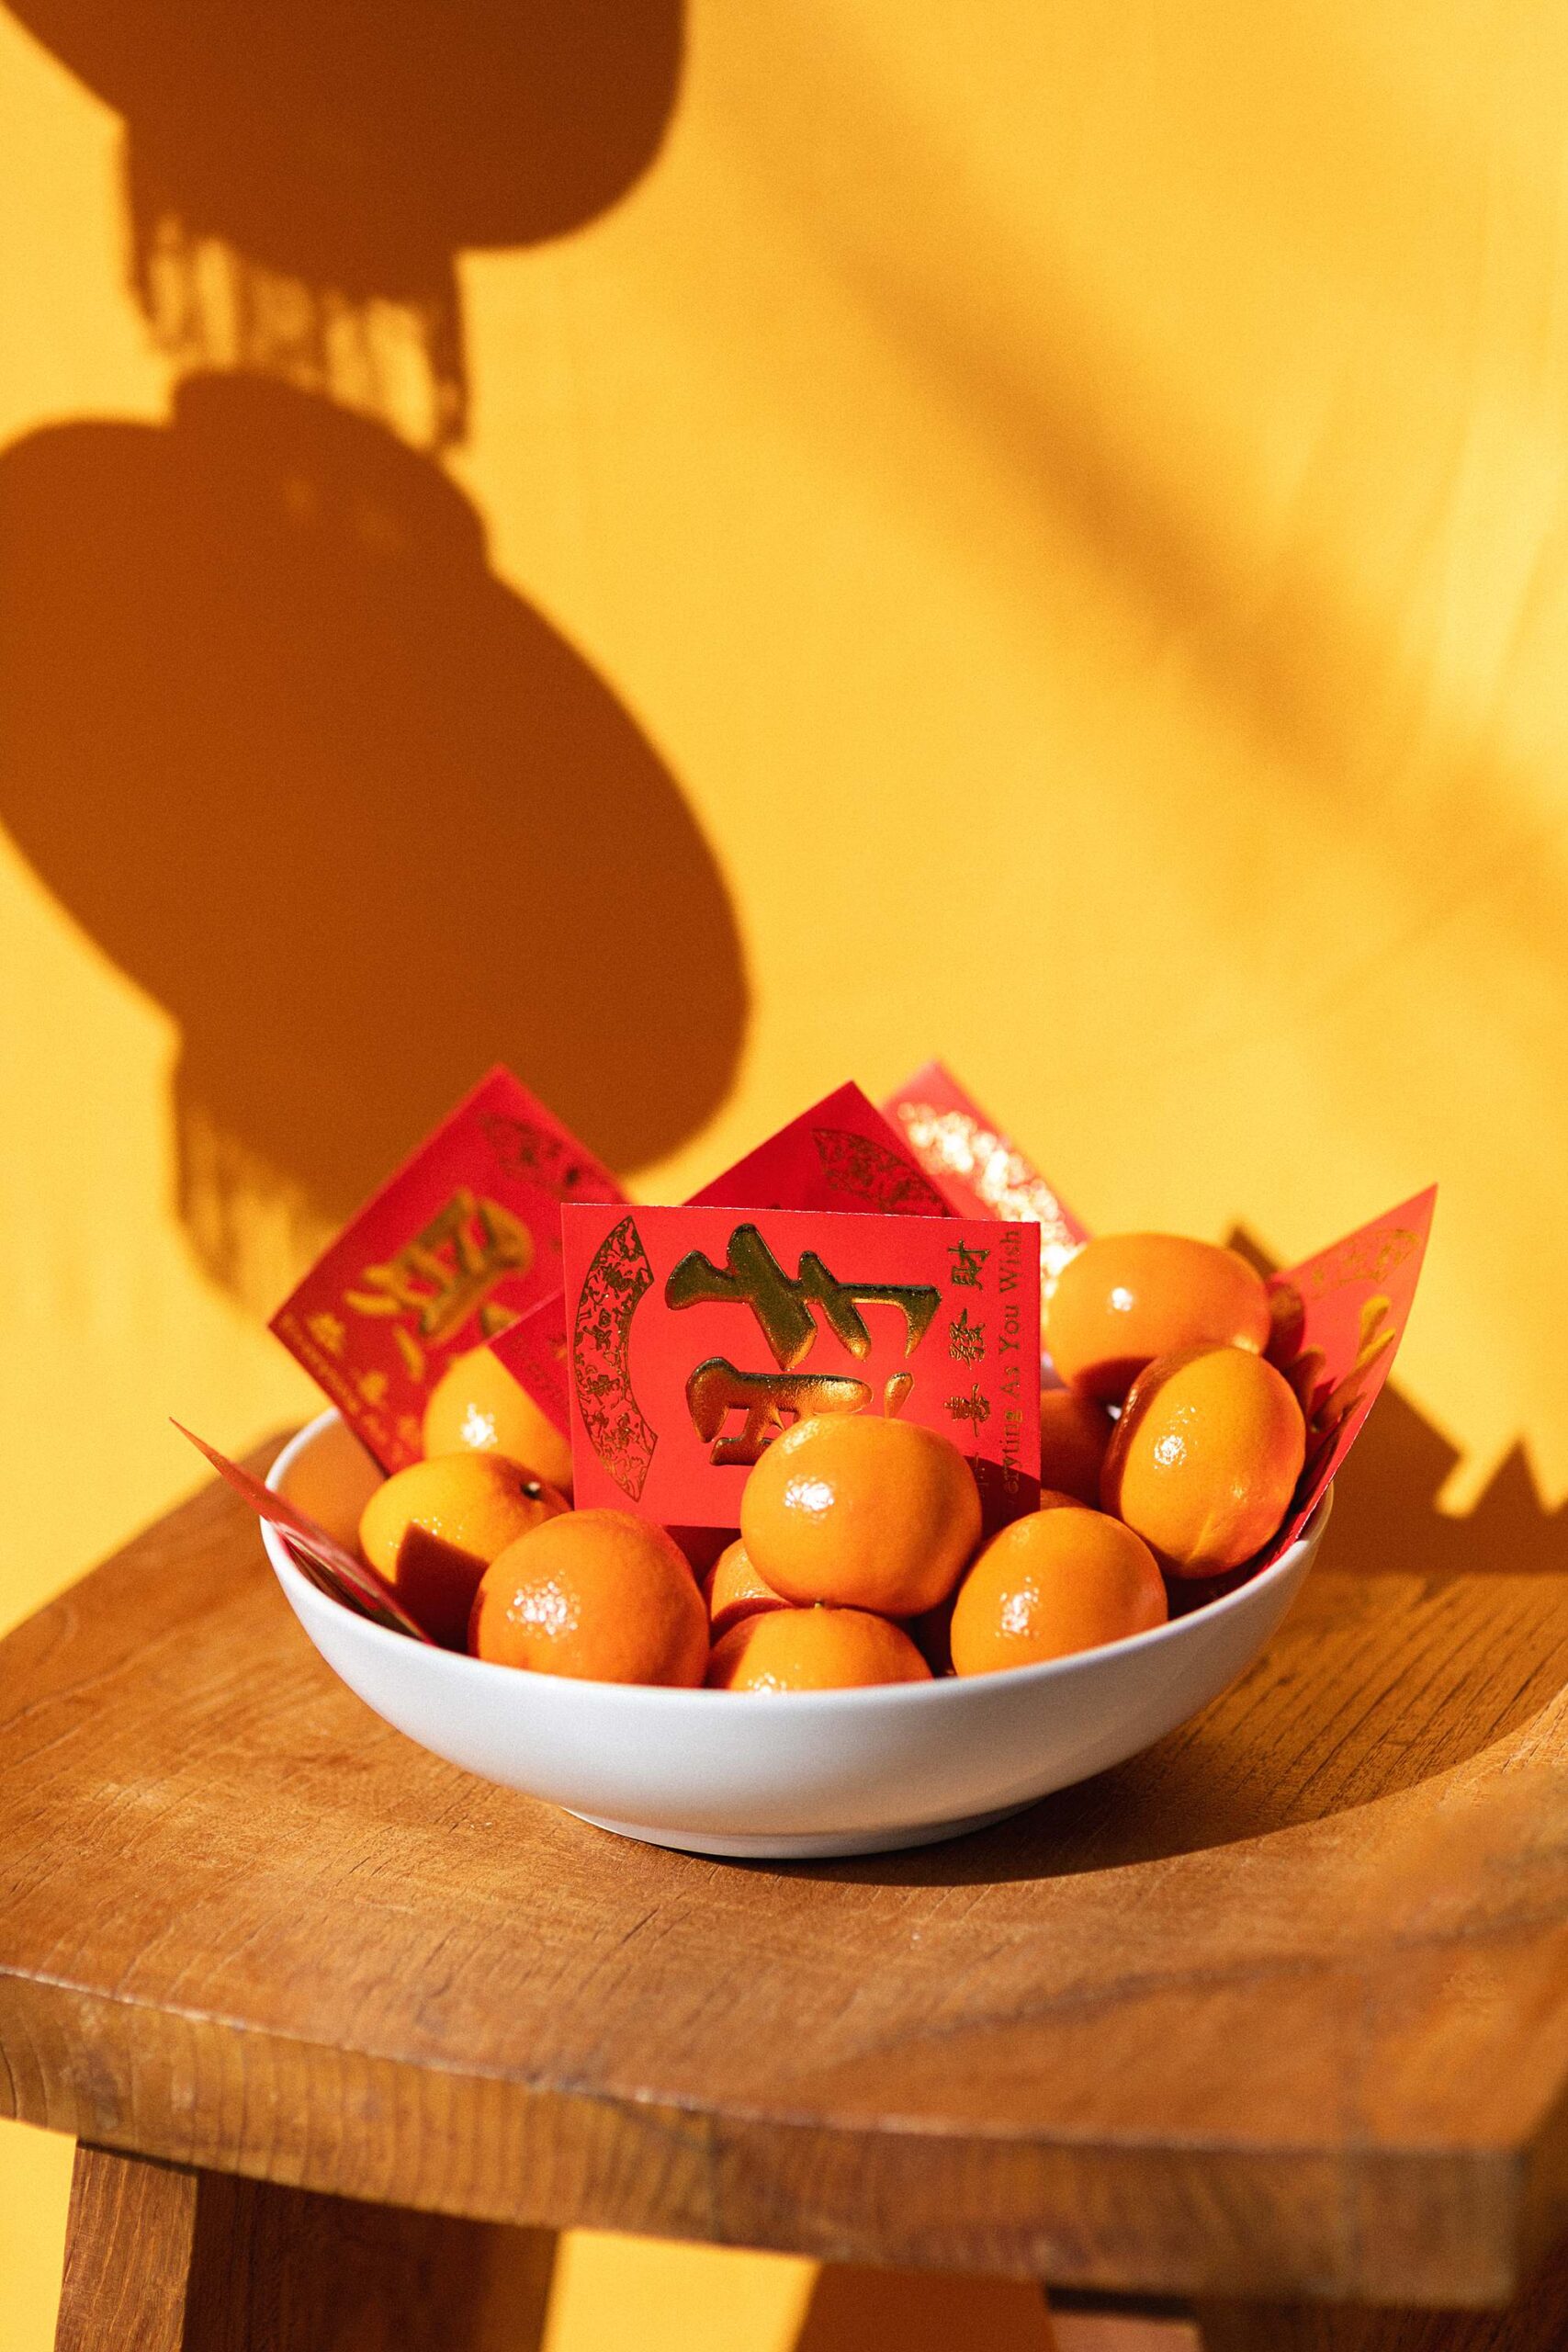 mandarin oranges in a bowl with red envelopes Chinese New Year - Chinese New Year lunar new year outfit and festivities - growing up Asian American blog post - DianaElizabethblog.com